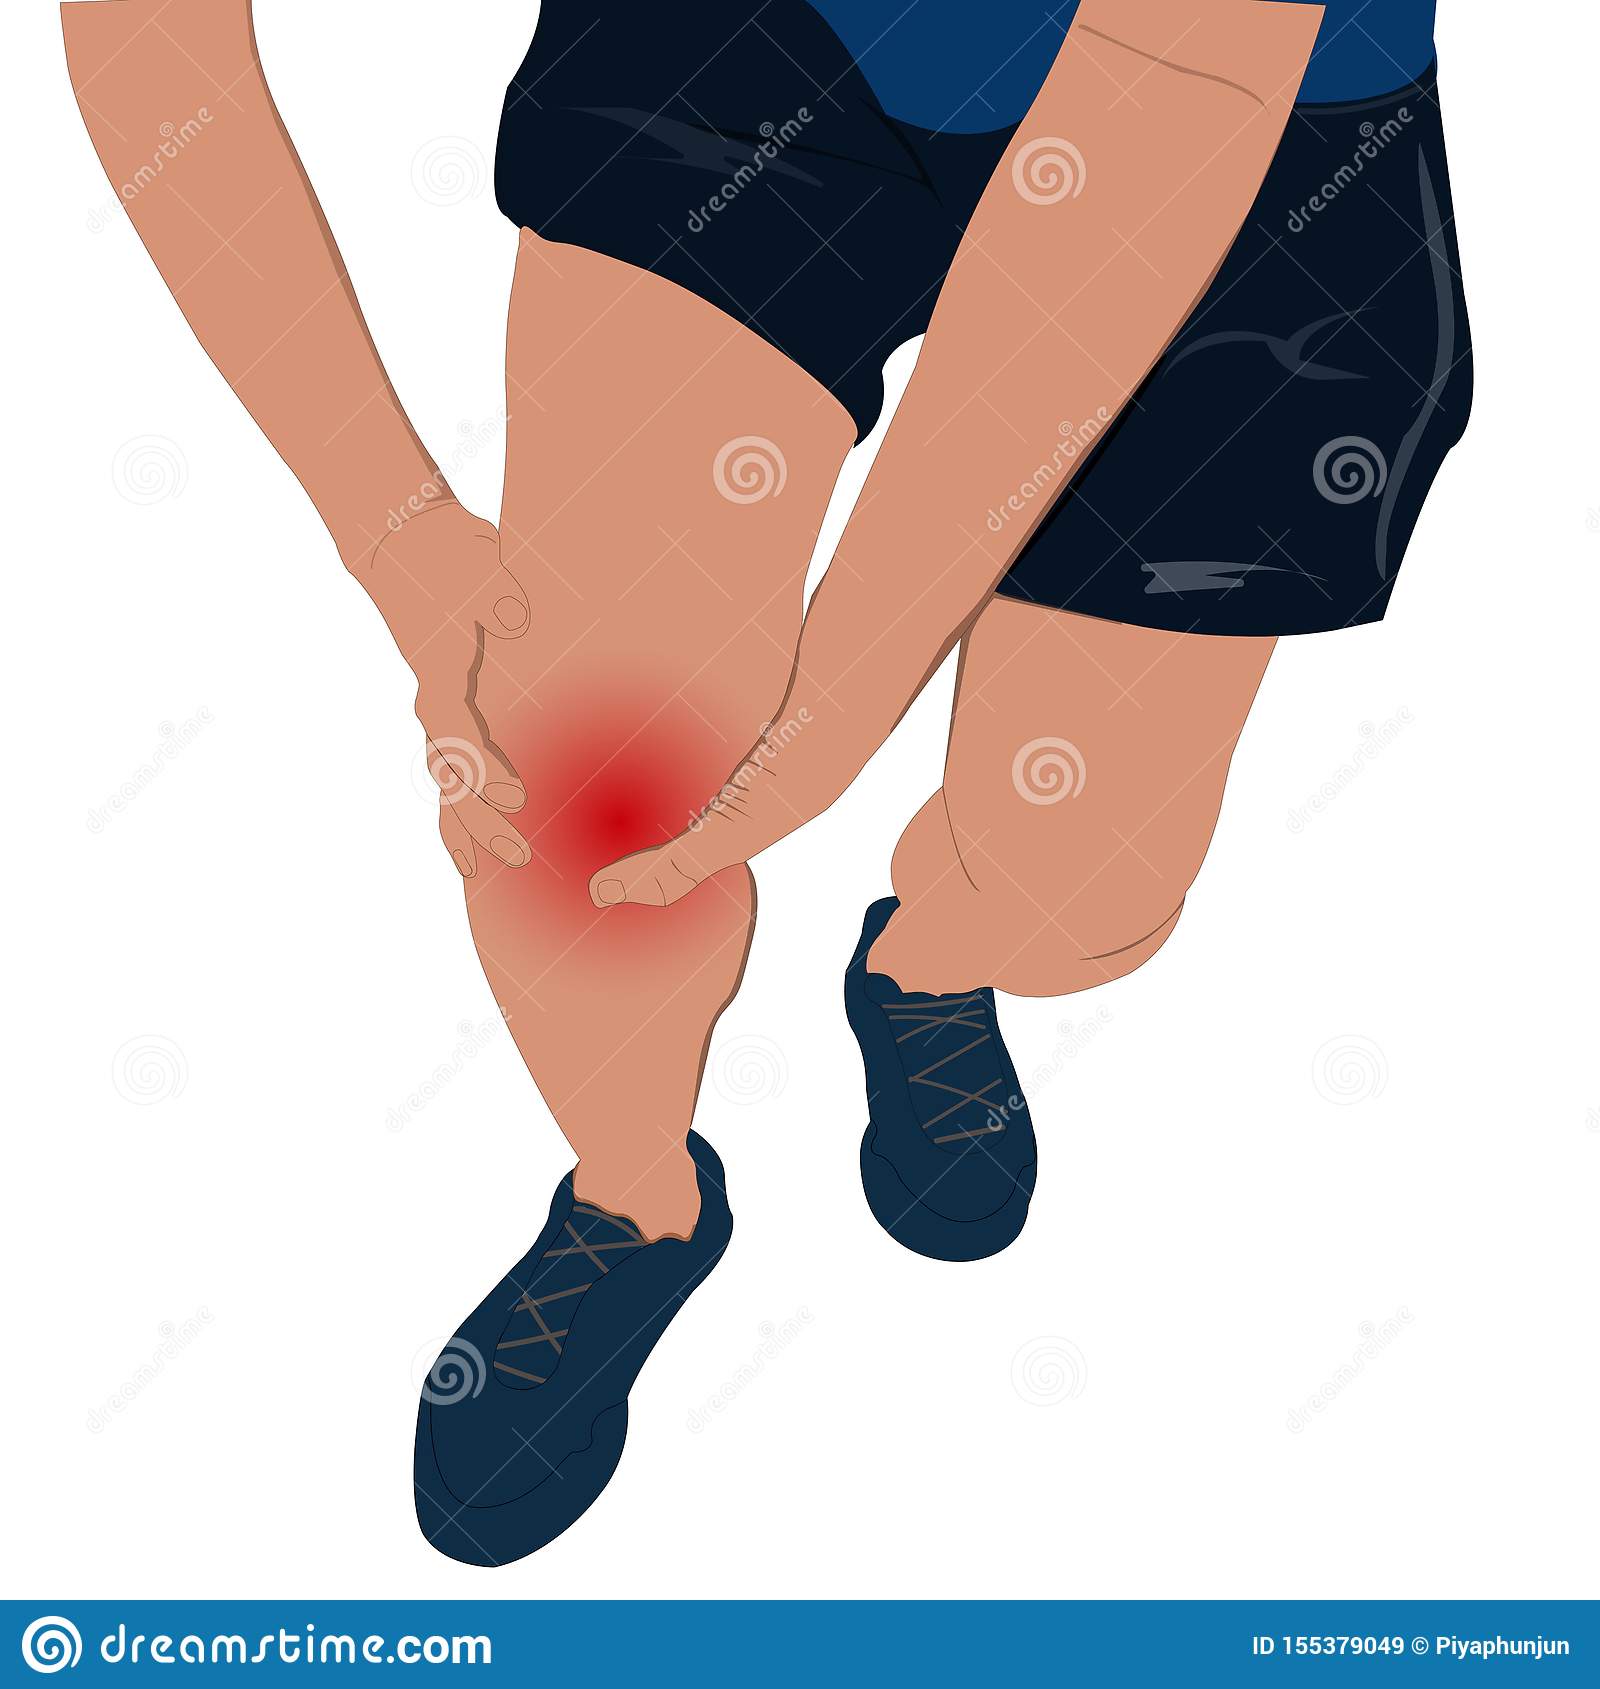 Tendon Knee Joint Problems Painful, Swelling Cartoon Vector ...